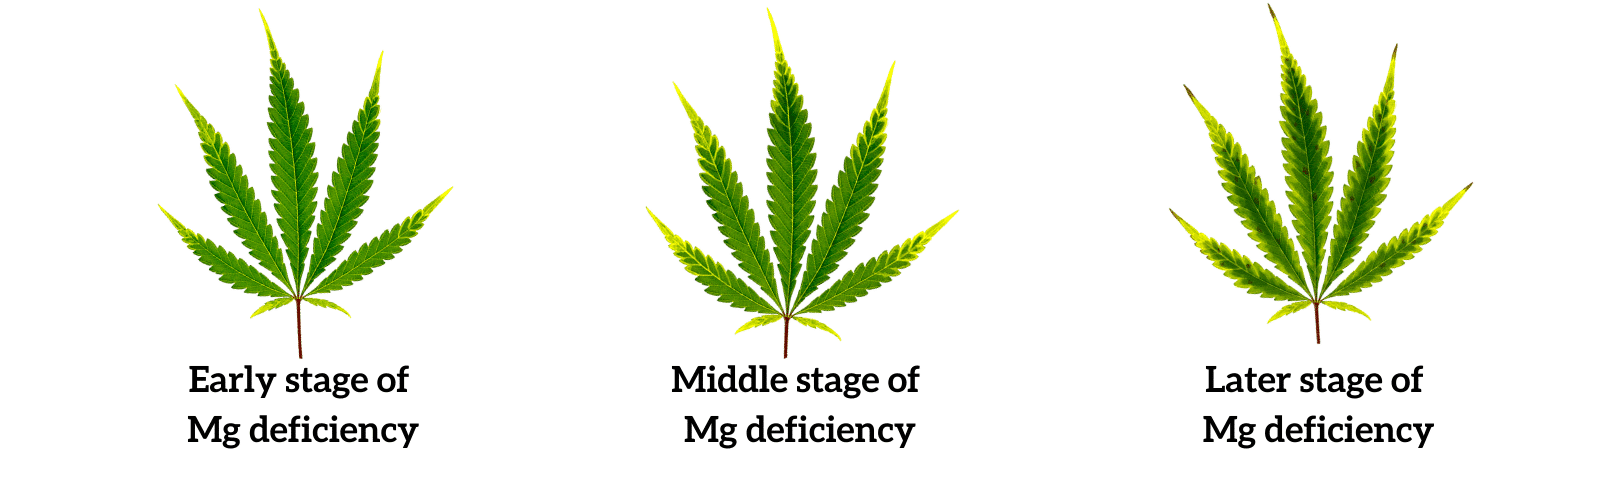 How to identify magnesium deficiency in cannabis plants